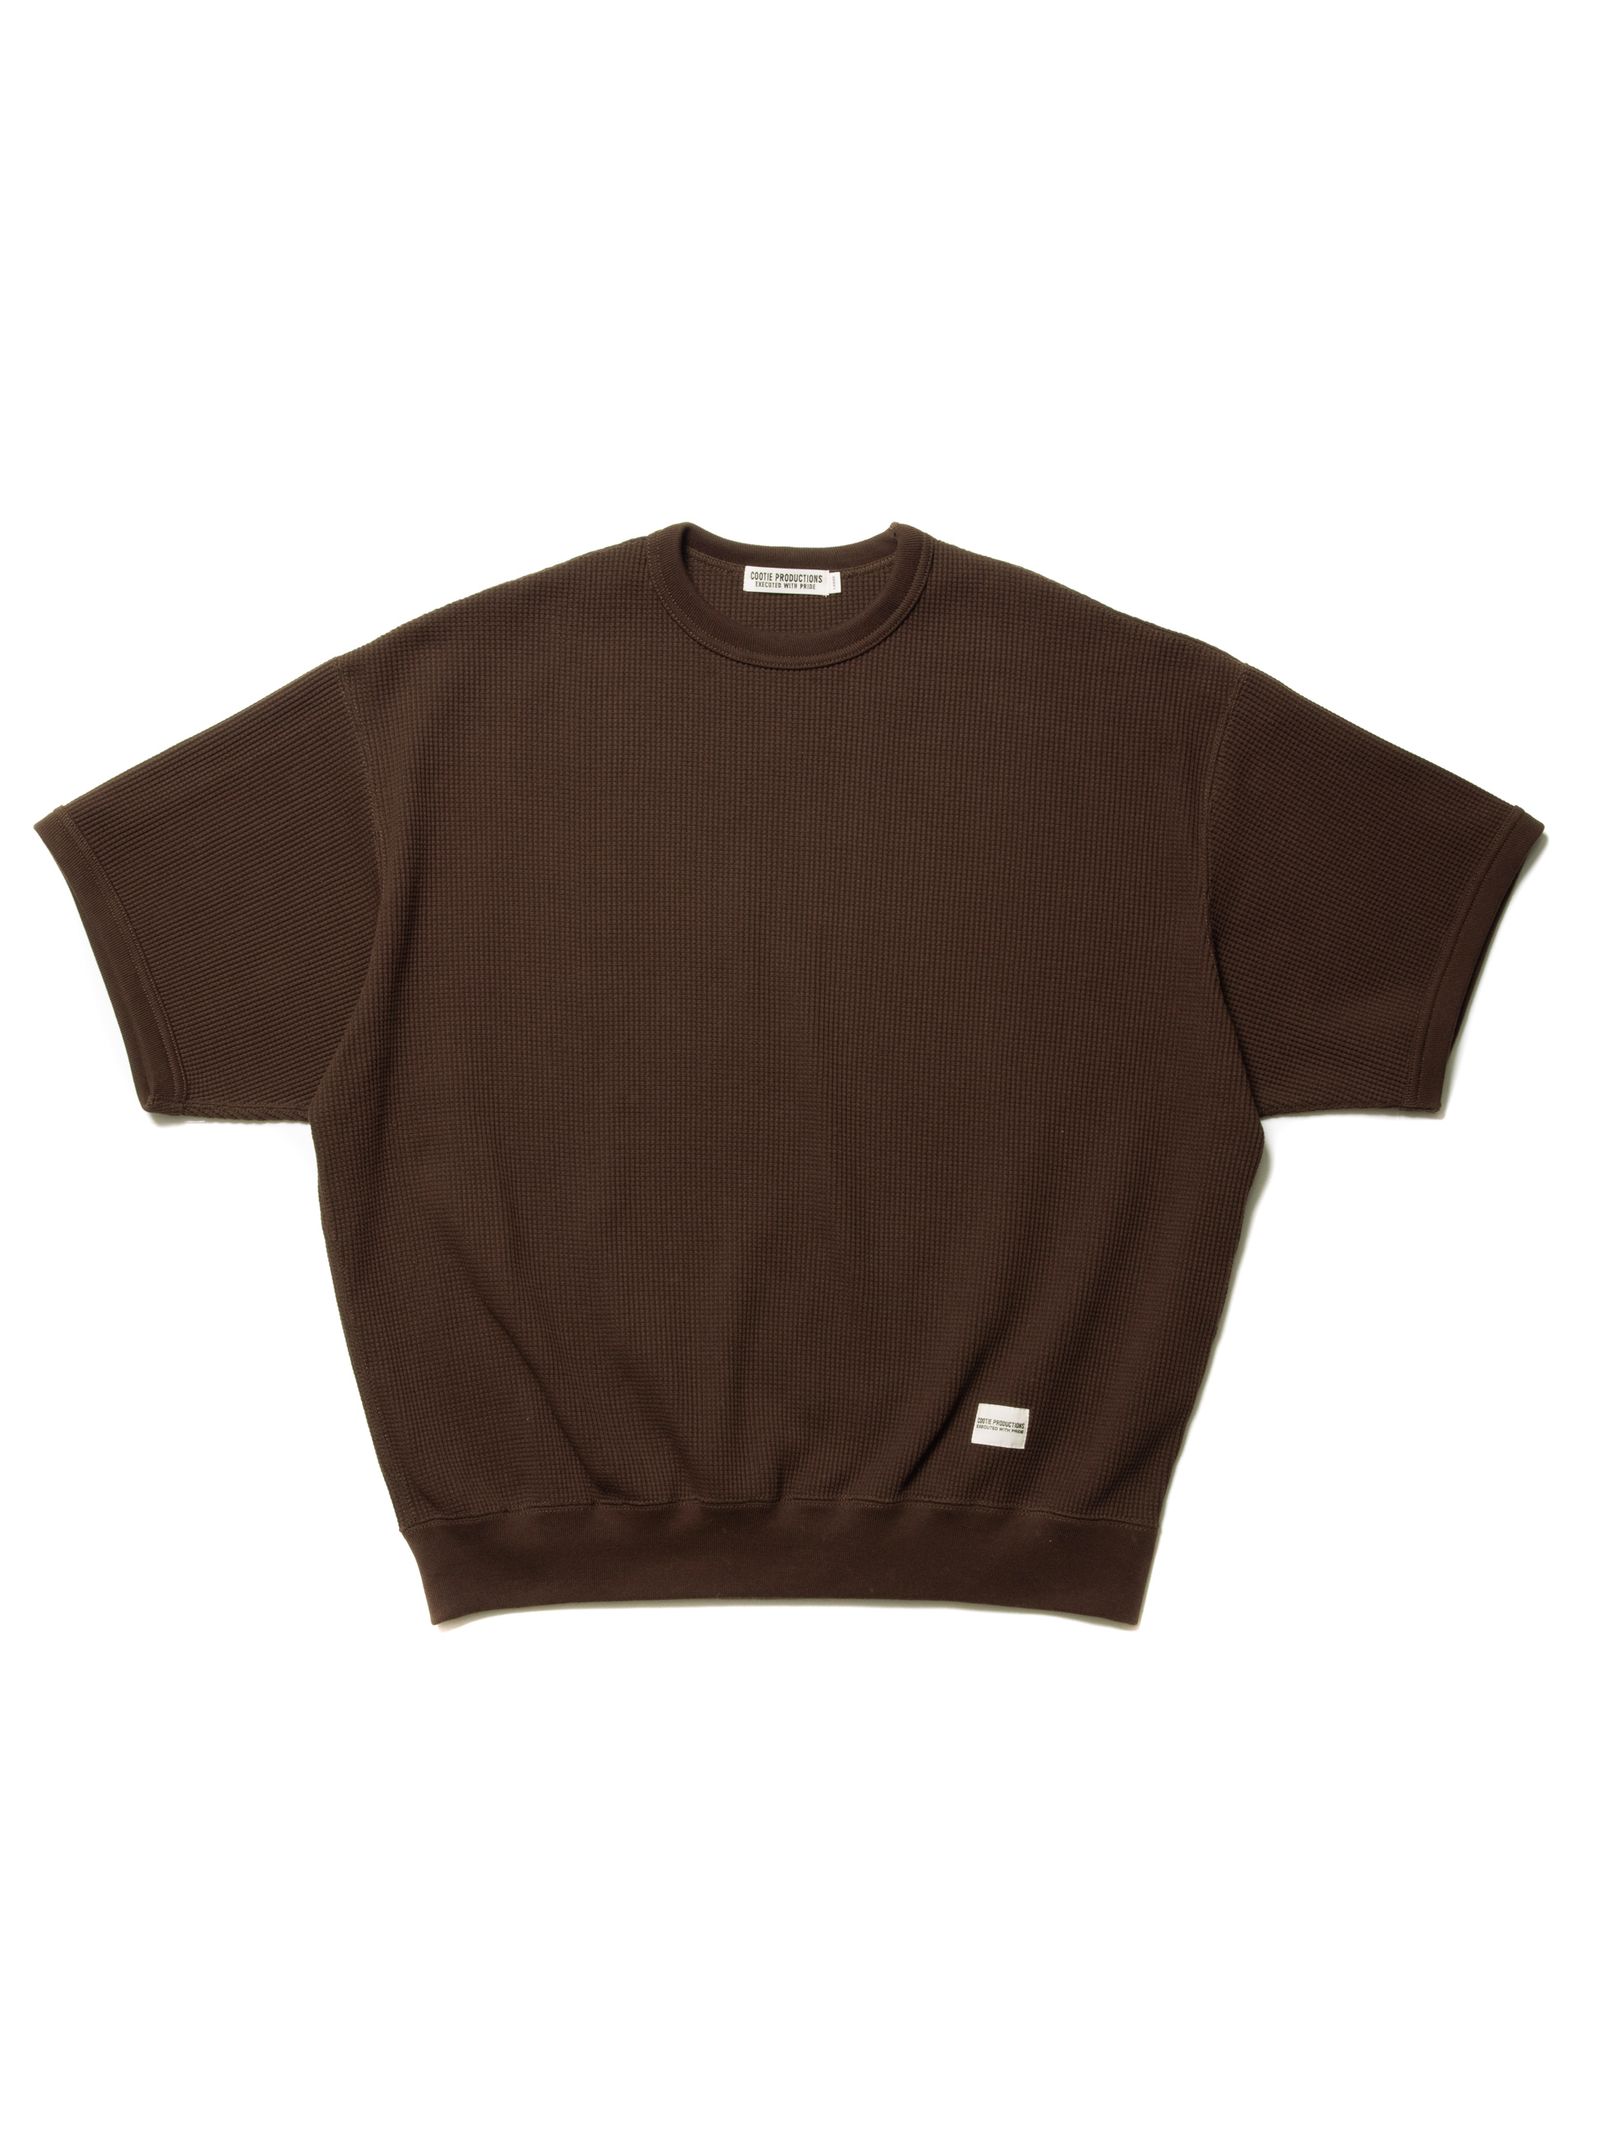 COOTIE PRODUCTIONS - Suvin Waffle S/S Crew (BROWN